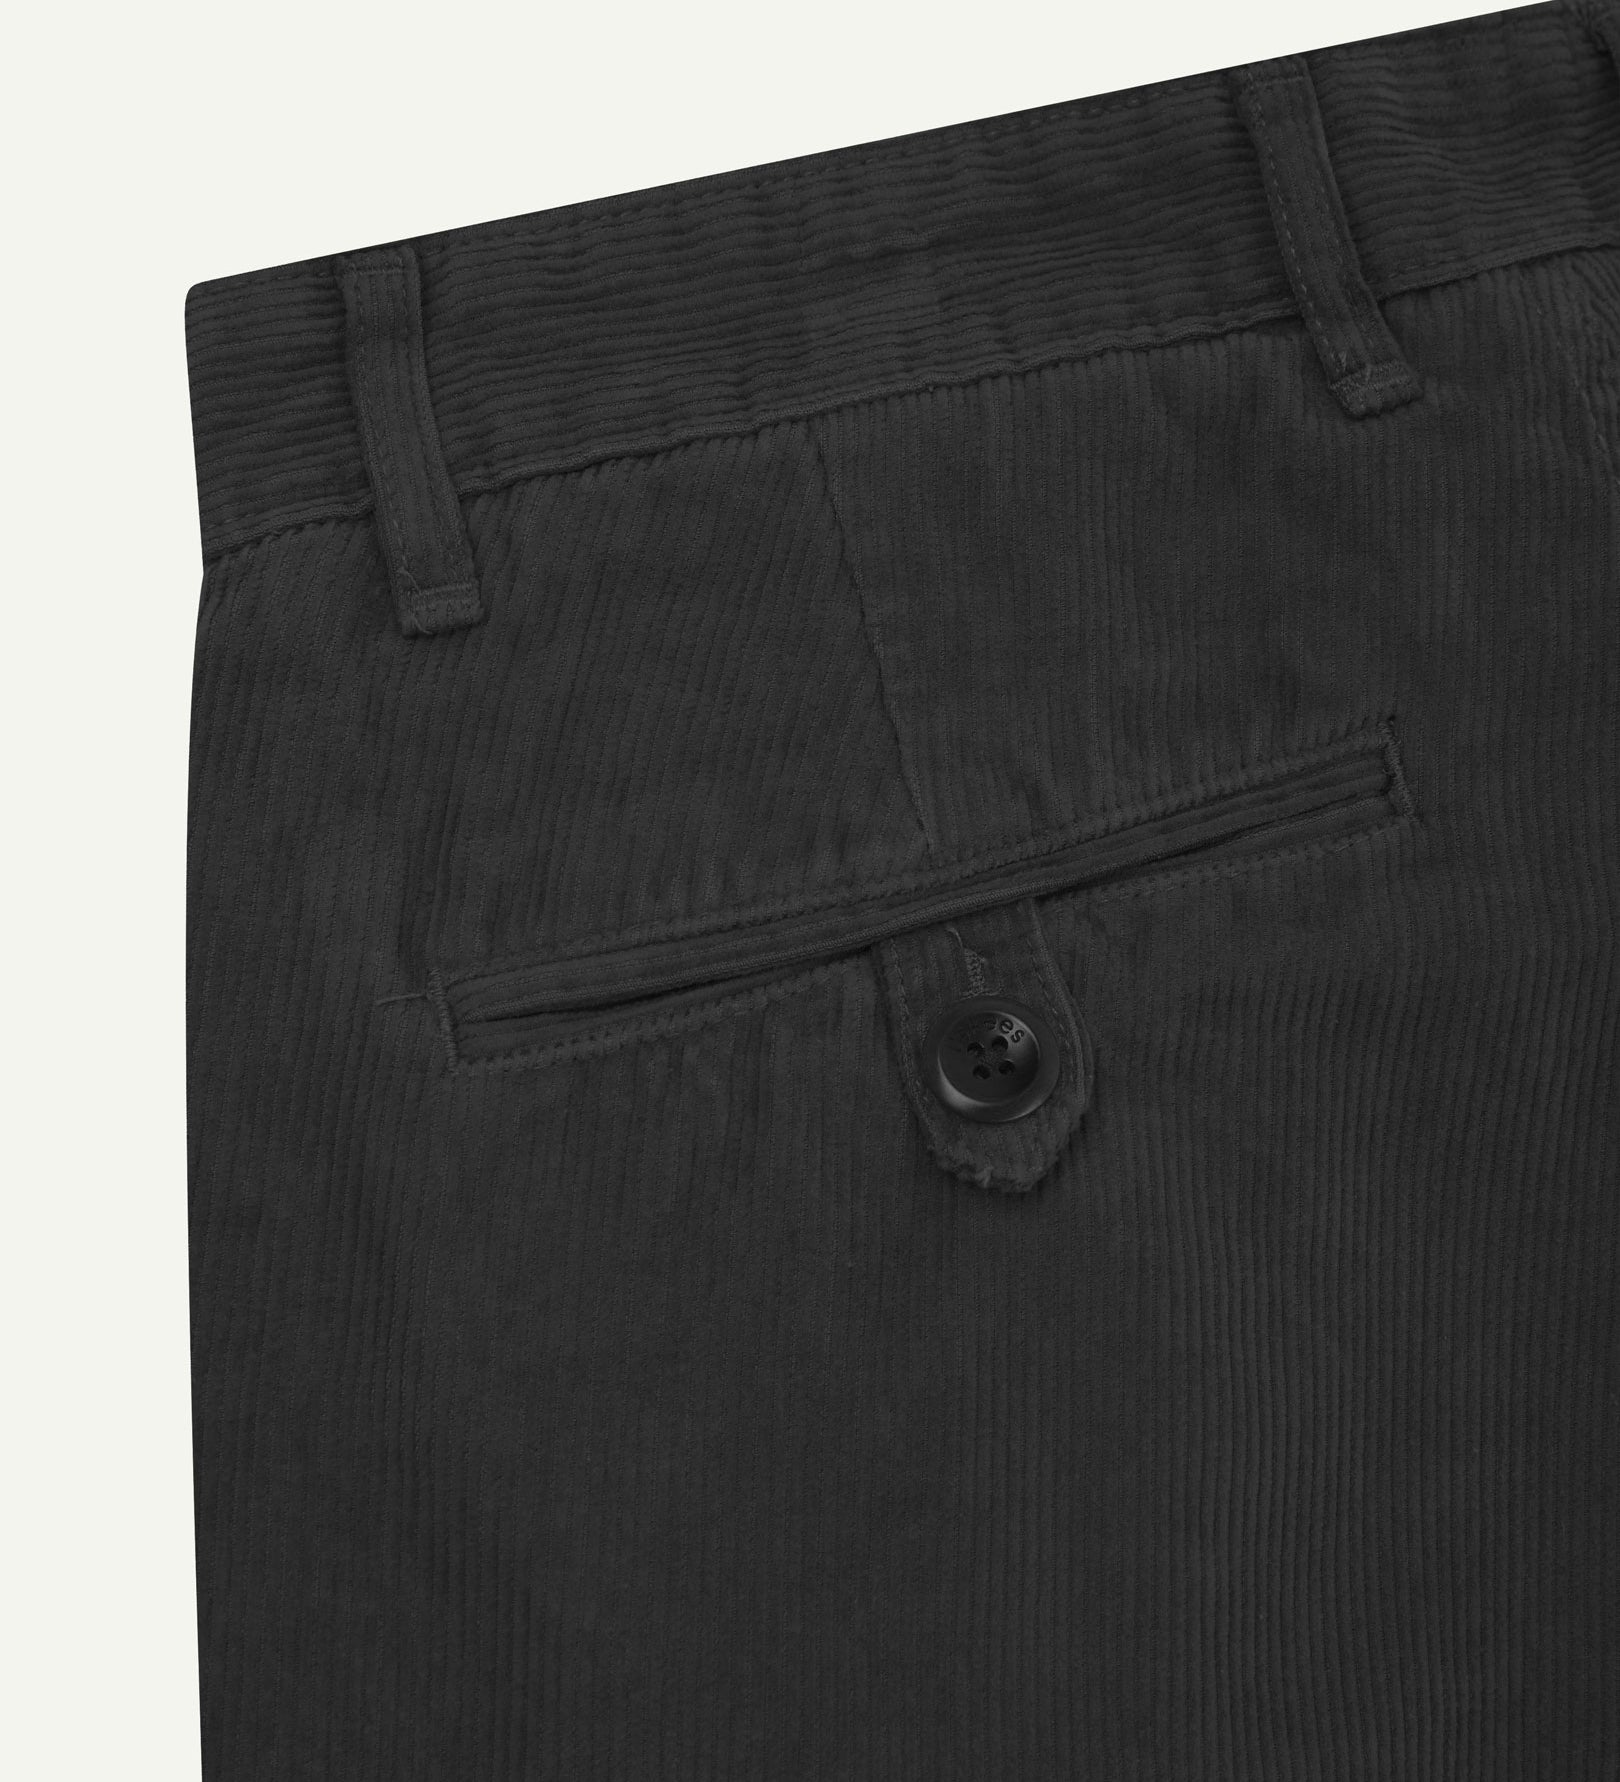 Close up back shot of Uskees 5018 cord boat pants in faded black with focus on neat back pocket secured with Corozo button and belt loops.